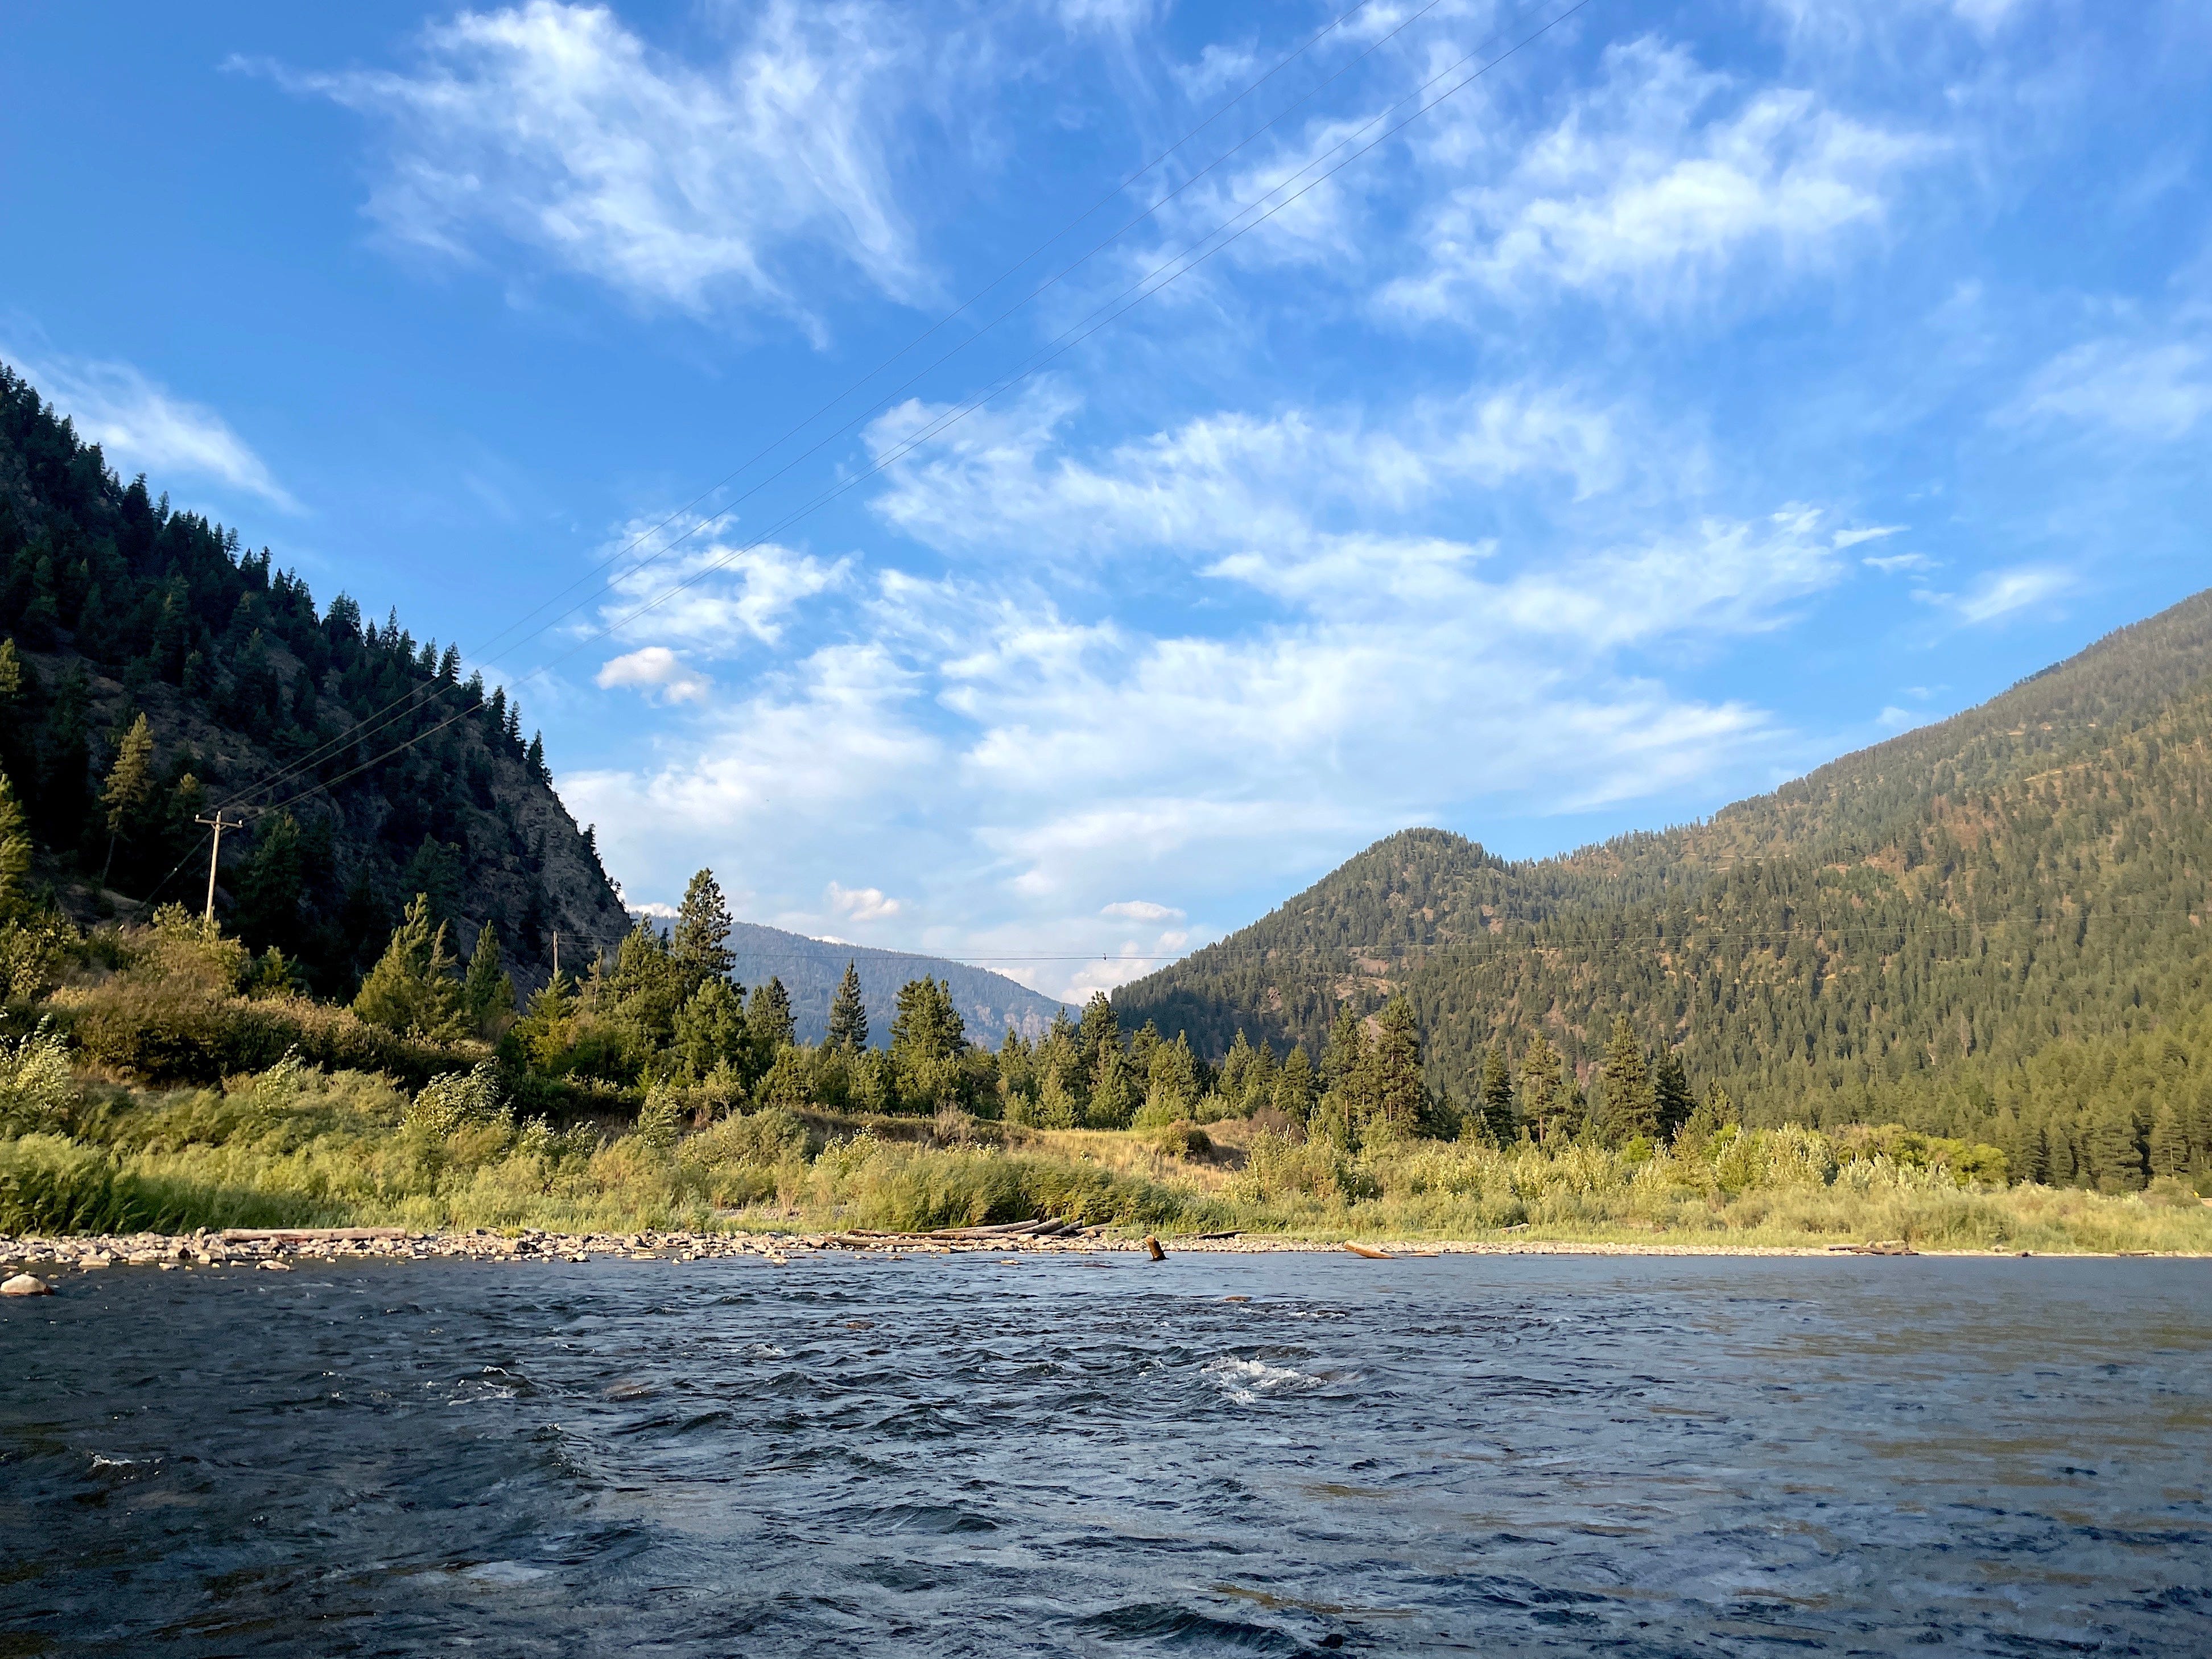 A landscape photo of the river behind KettleHouse Amphitheater in Bonner, Montana. A river with mountains on either side dotted with trees, blue sky with wispy clouds, and a power line traversing above the river.